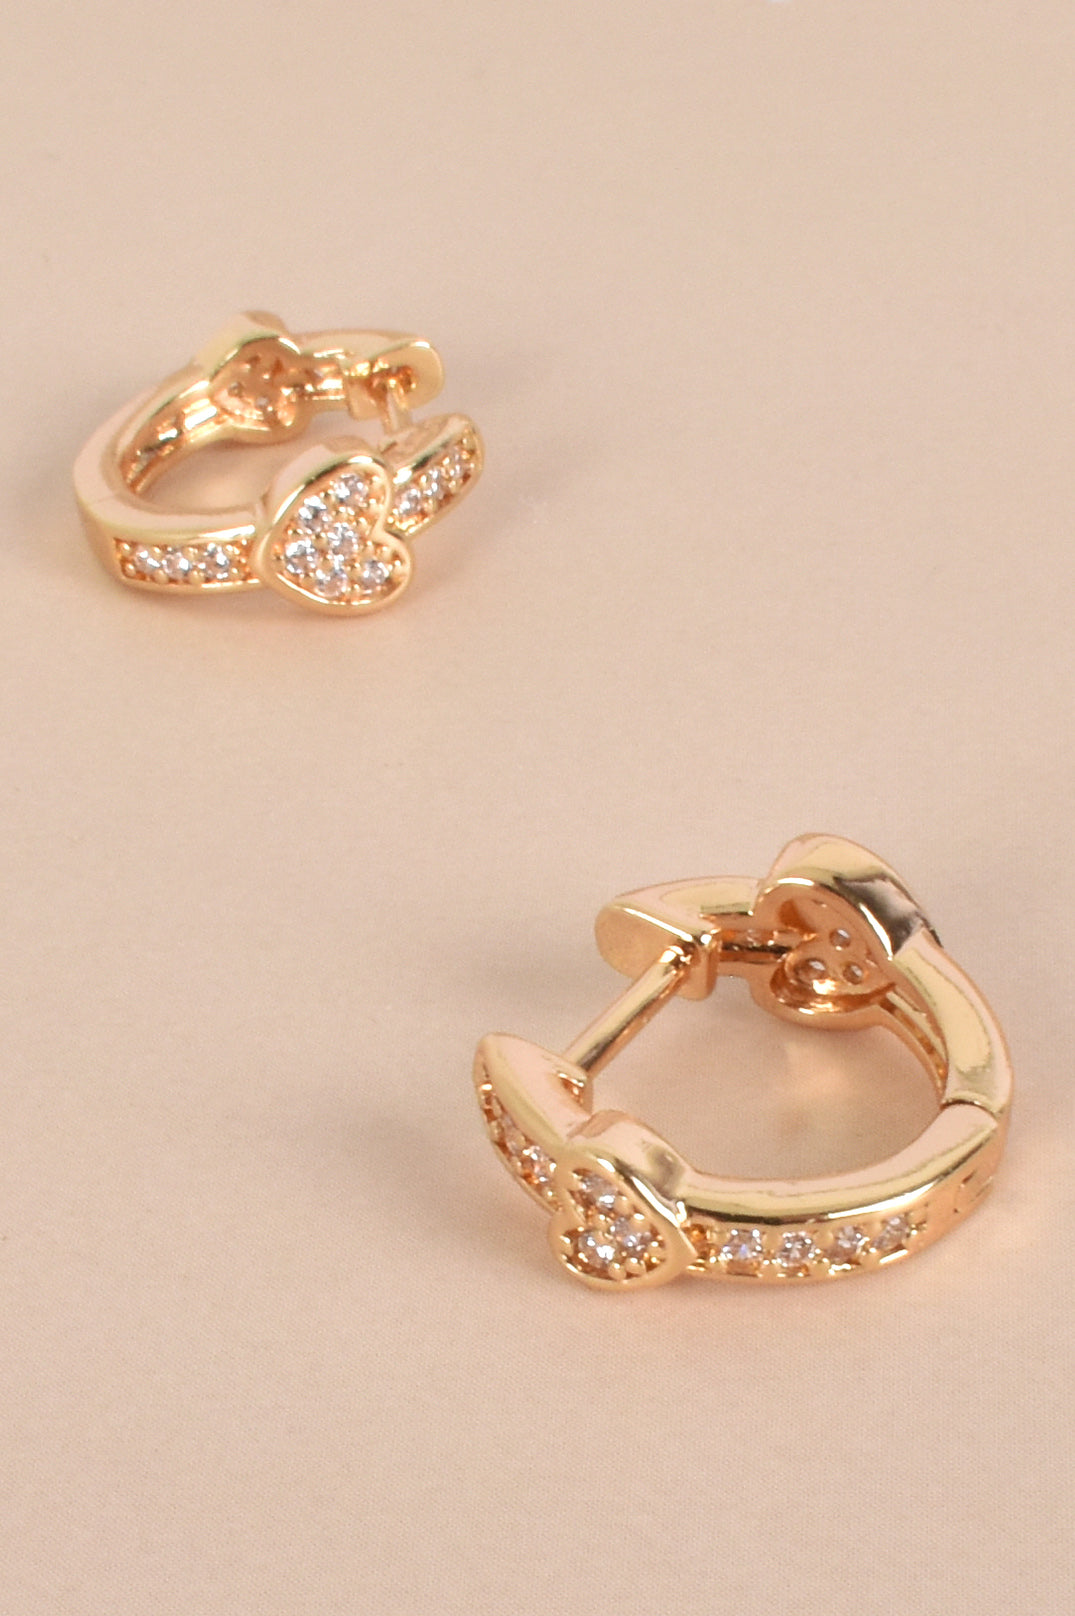 Diamante Heart Mini Hoop Earrings available in Gold Crystal and Silver Crystal.